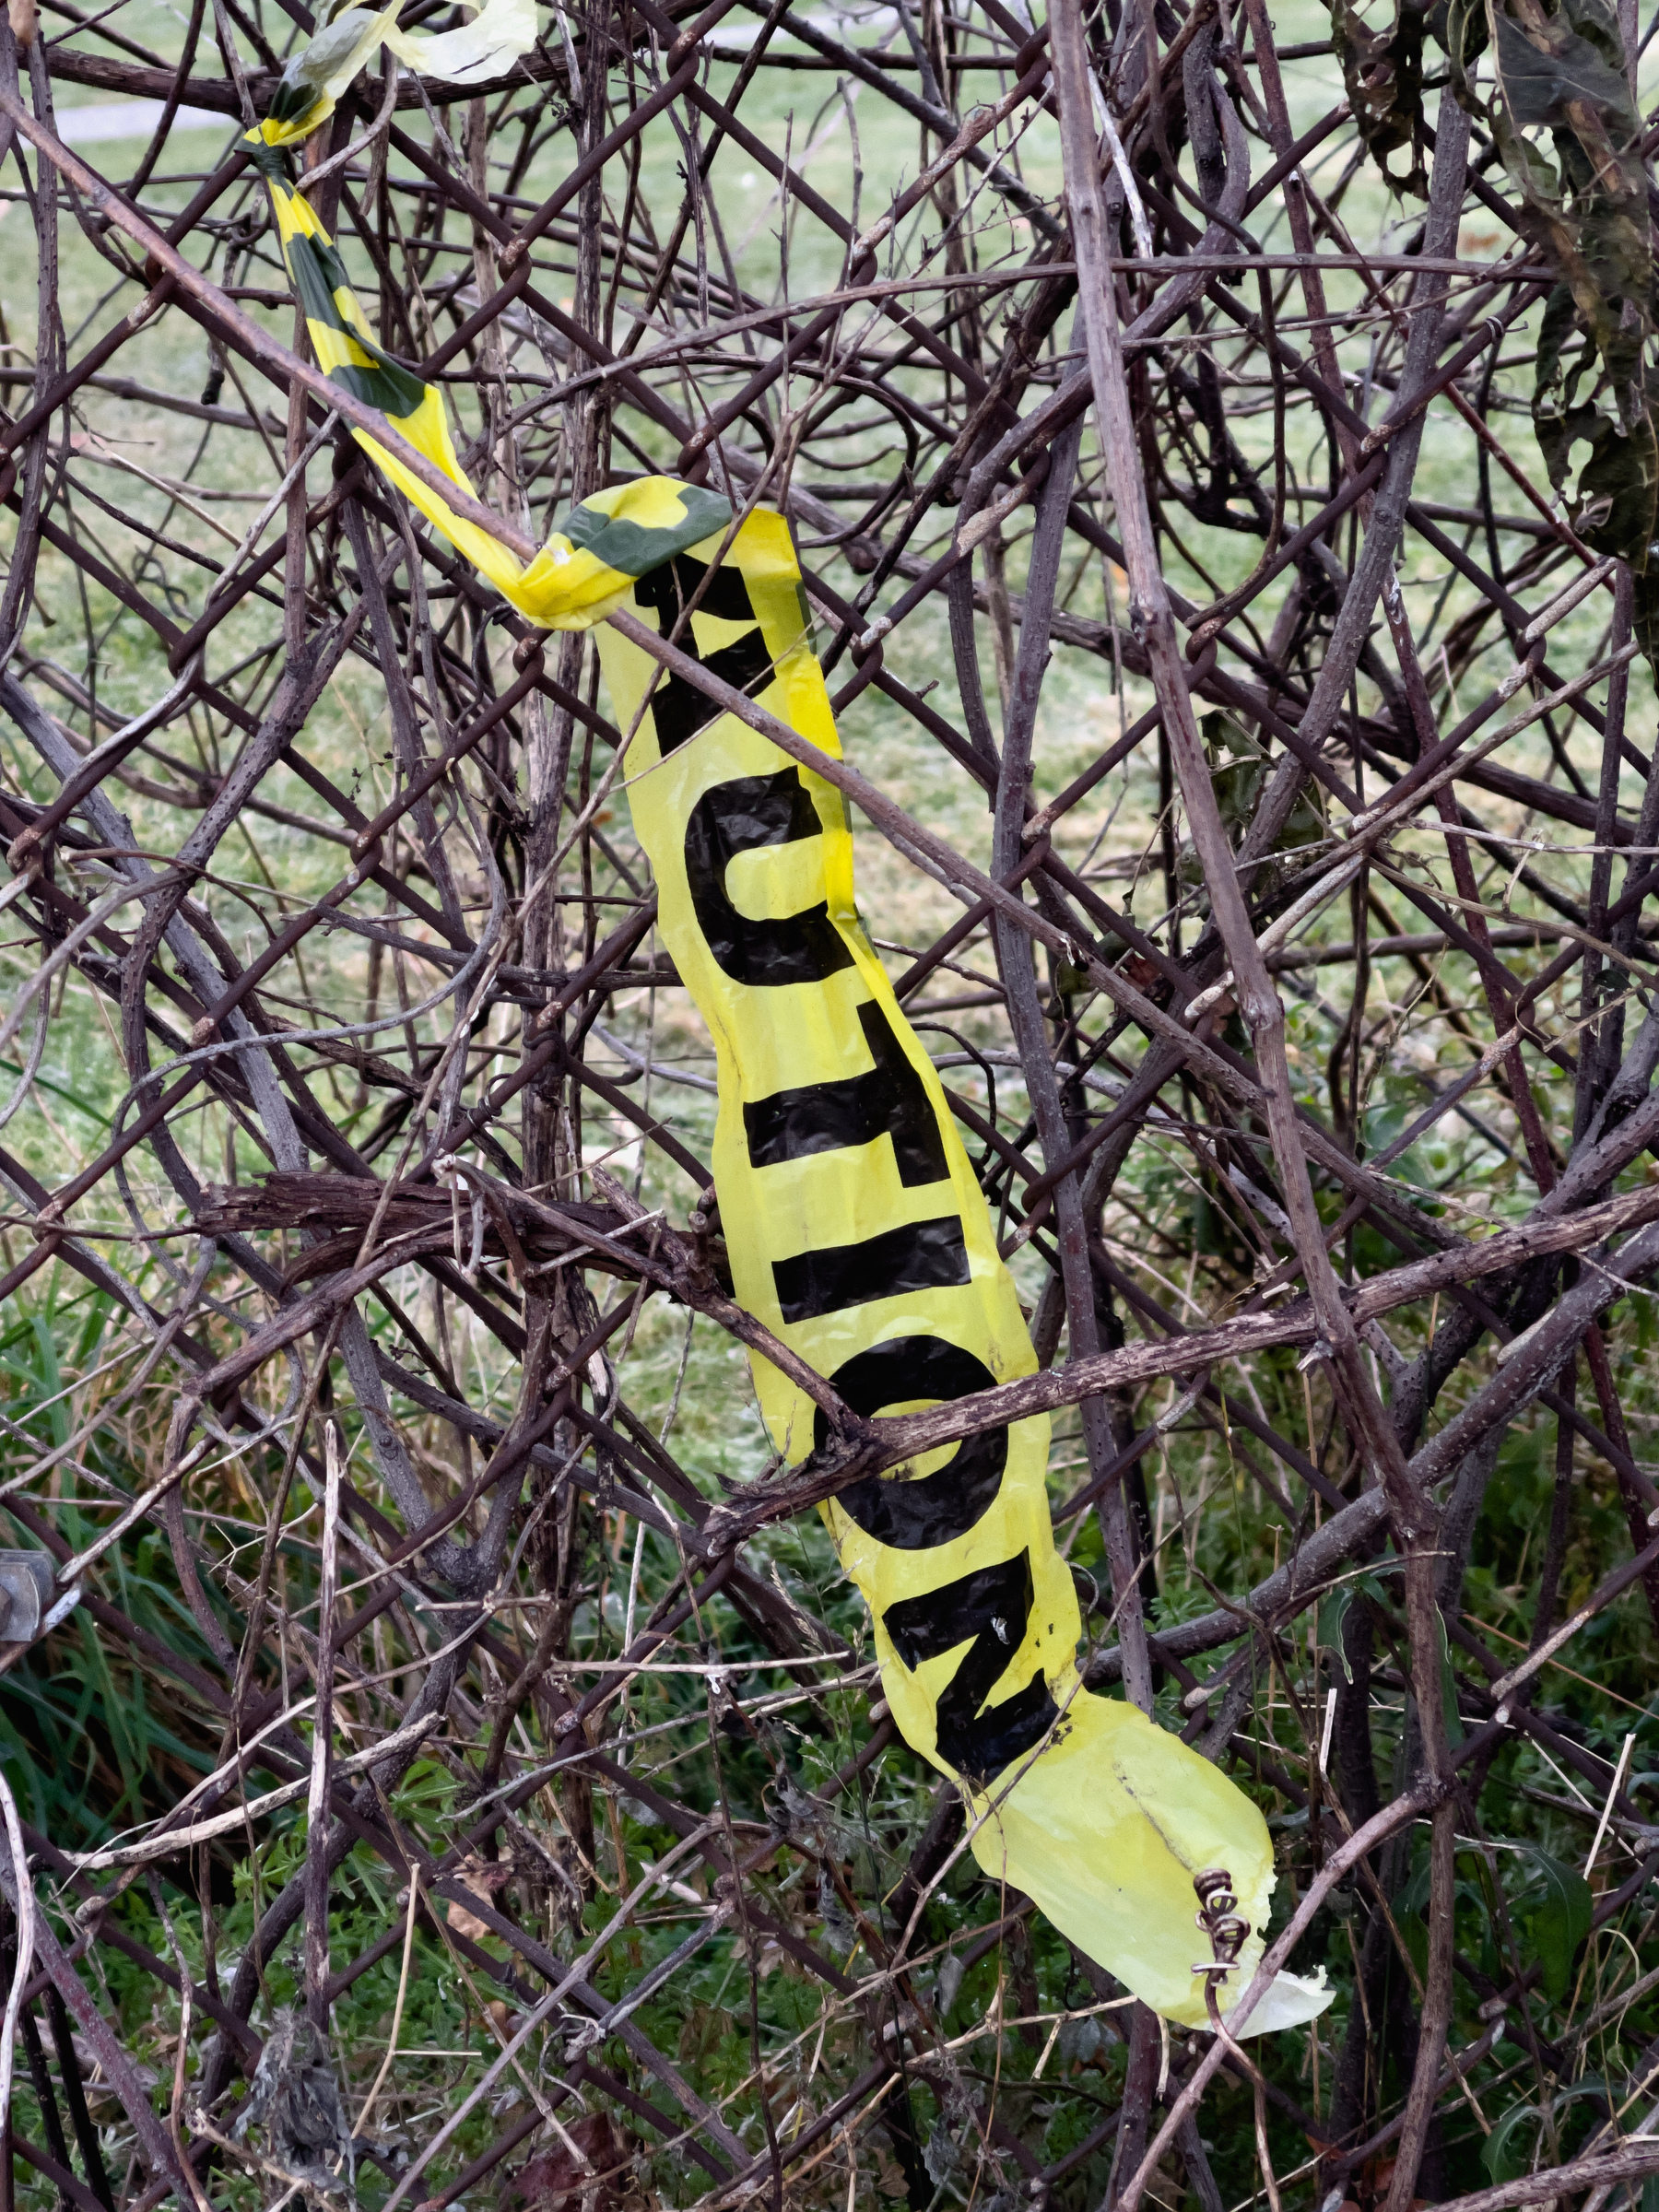 Yellow caution tape tangled in leafless vines on a fence.